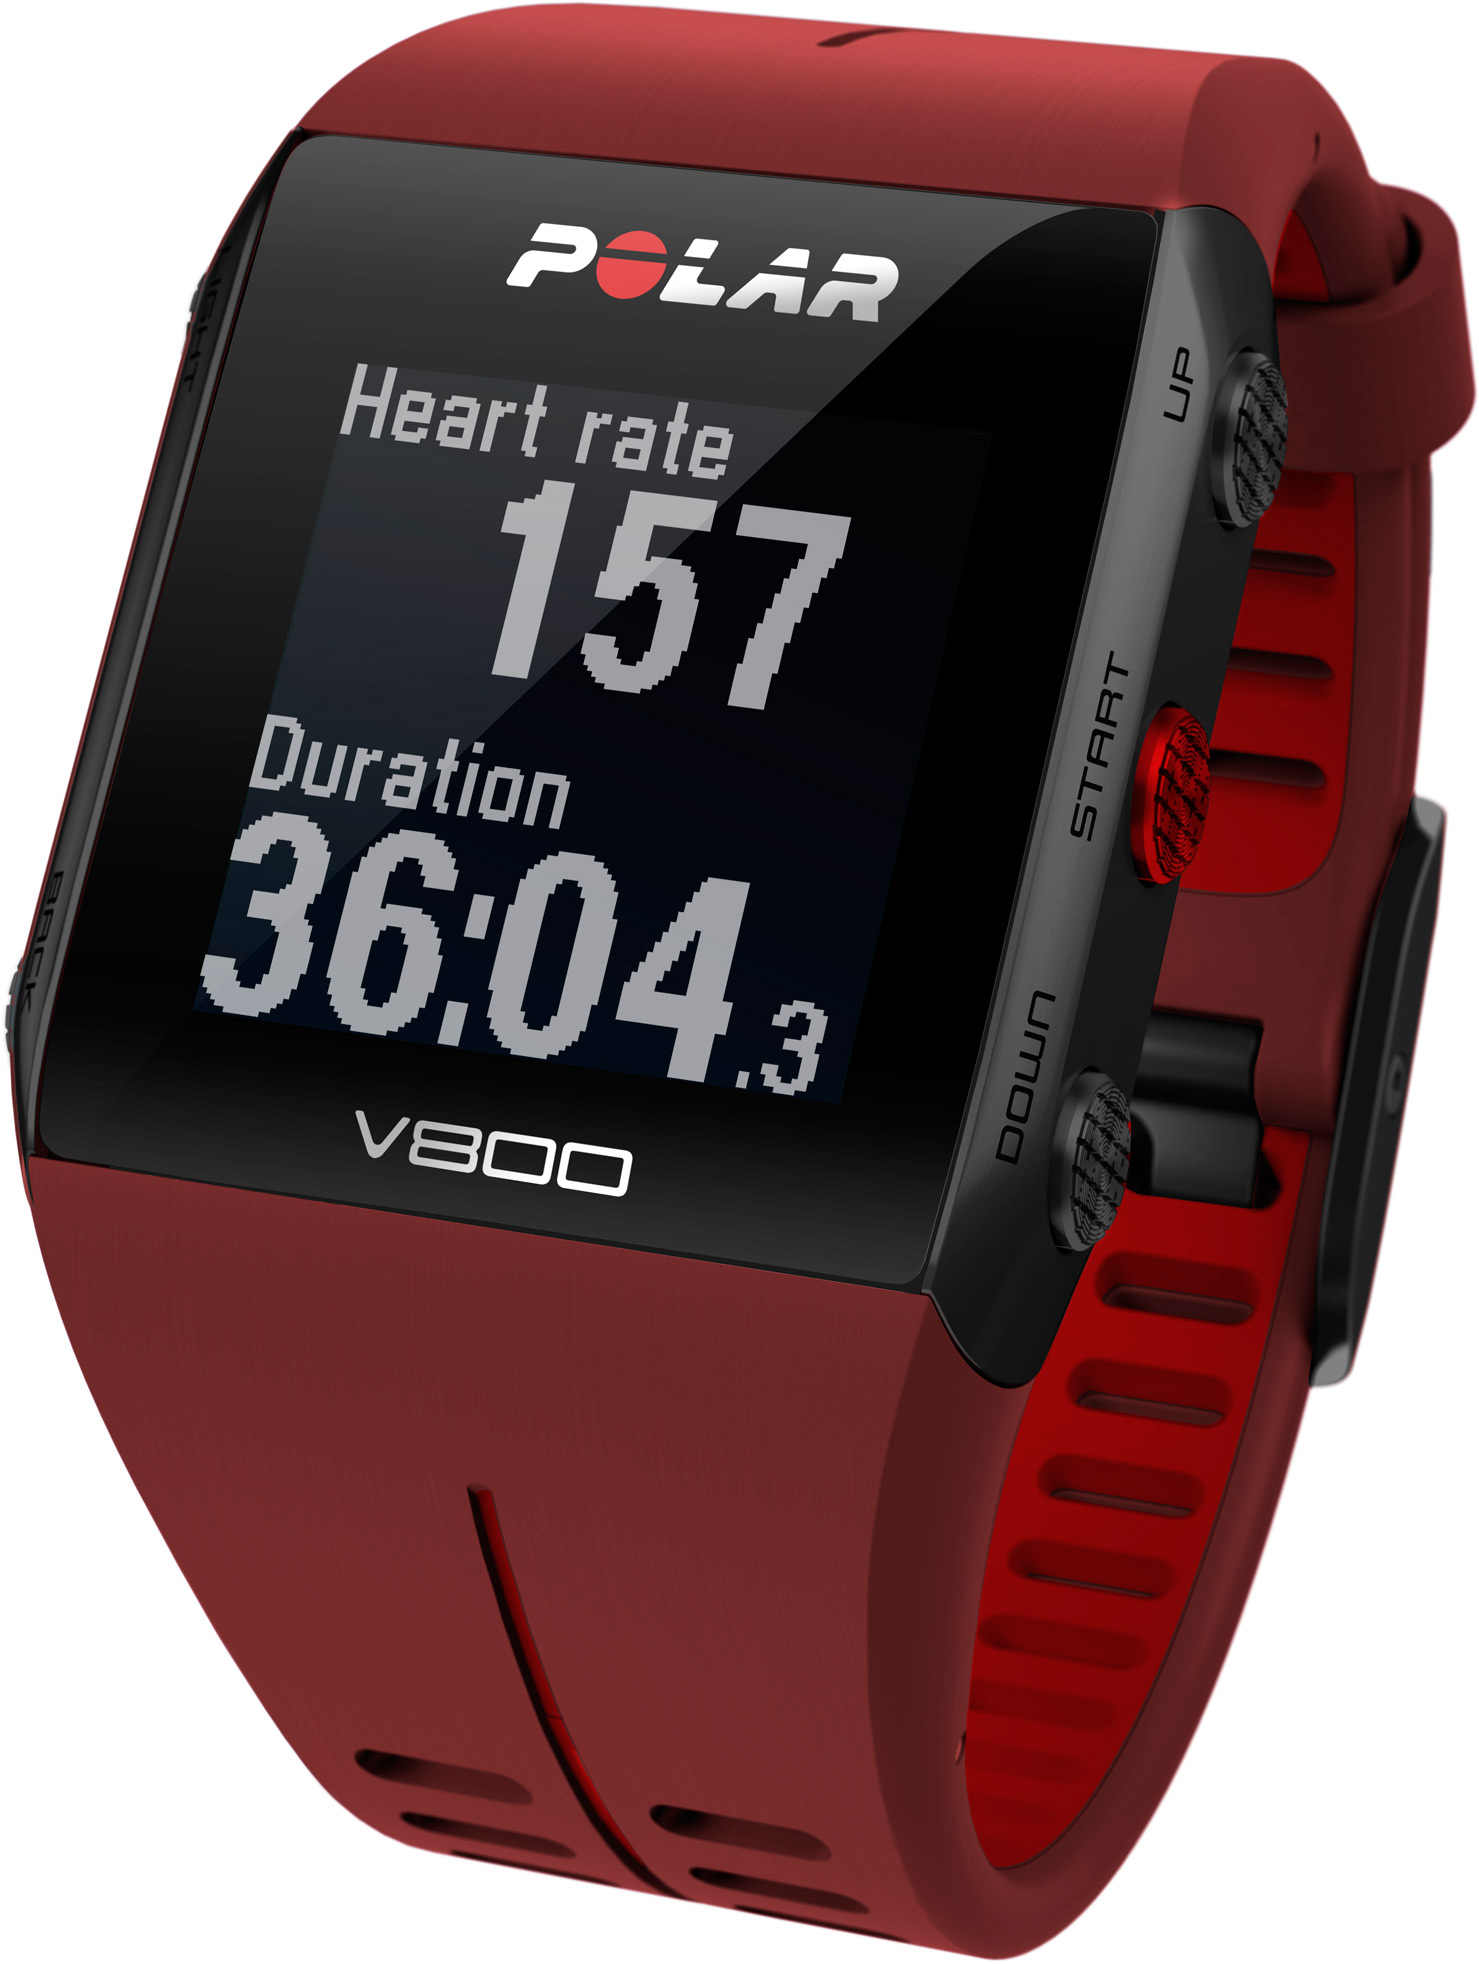 Sports watch with GPS